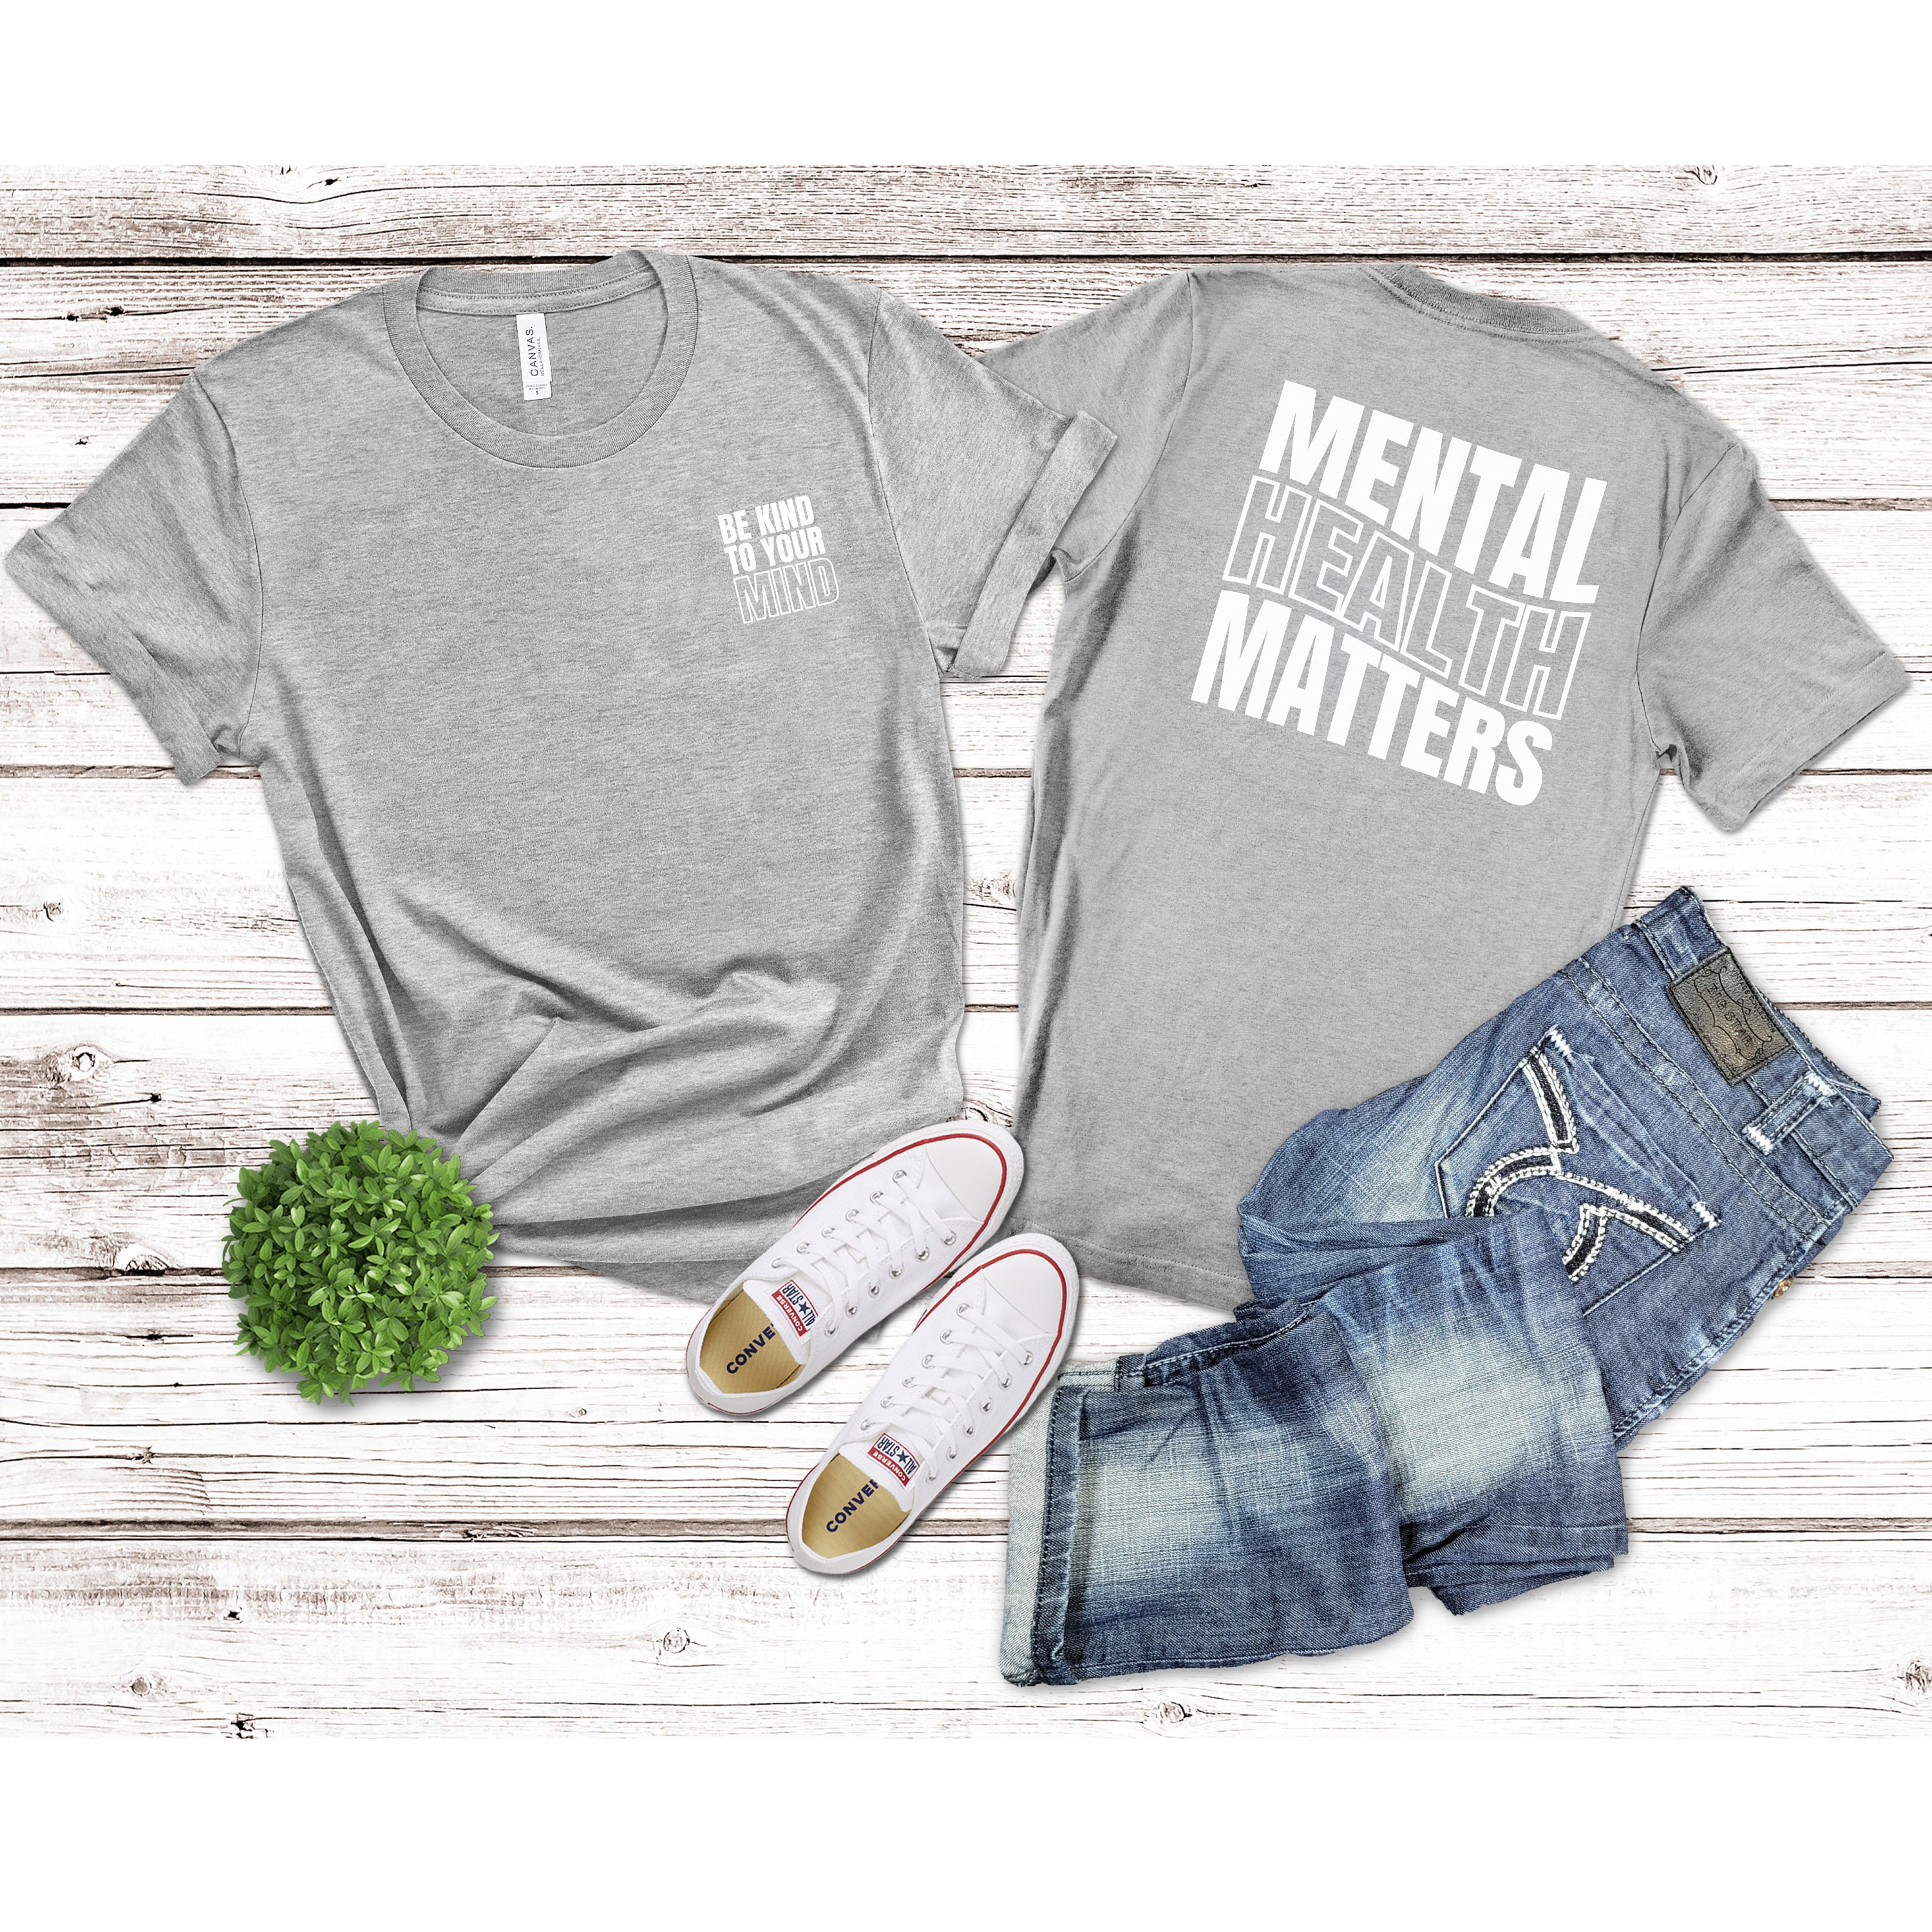 Discover Mental Health Matters Shirt, You Matter Shirt, You Are Enough Shirt, Be Kind to Your Mind, Positive T Shirt, Male Mental Health Shirt